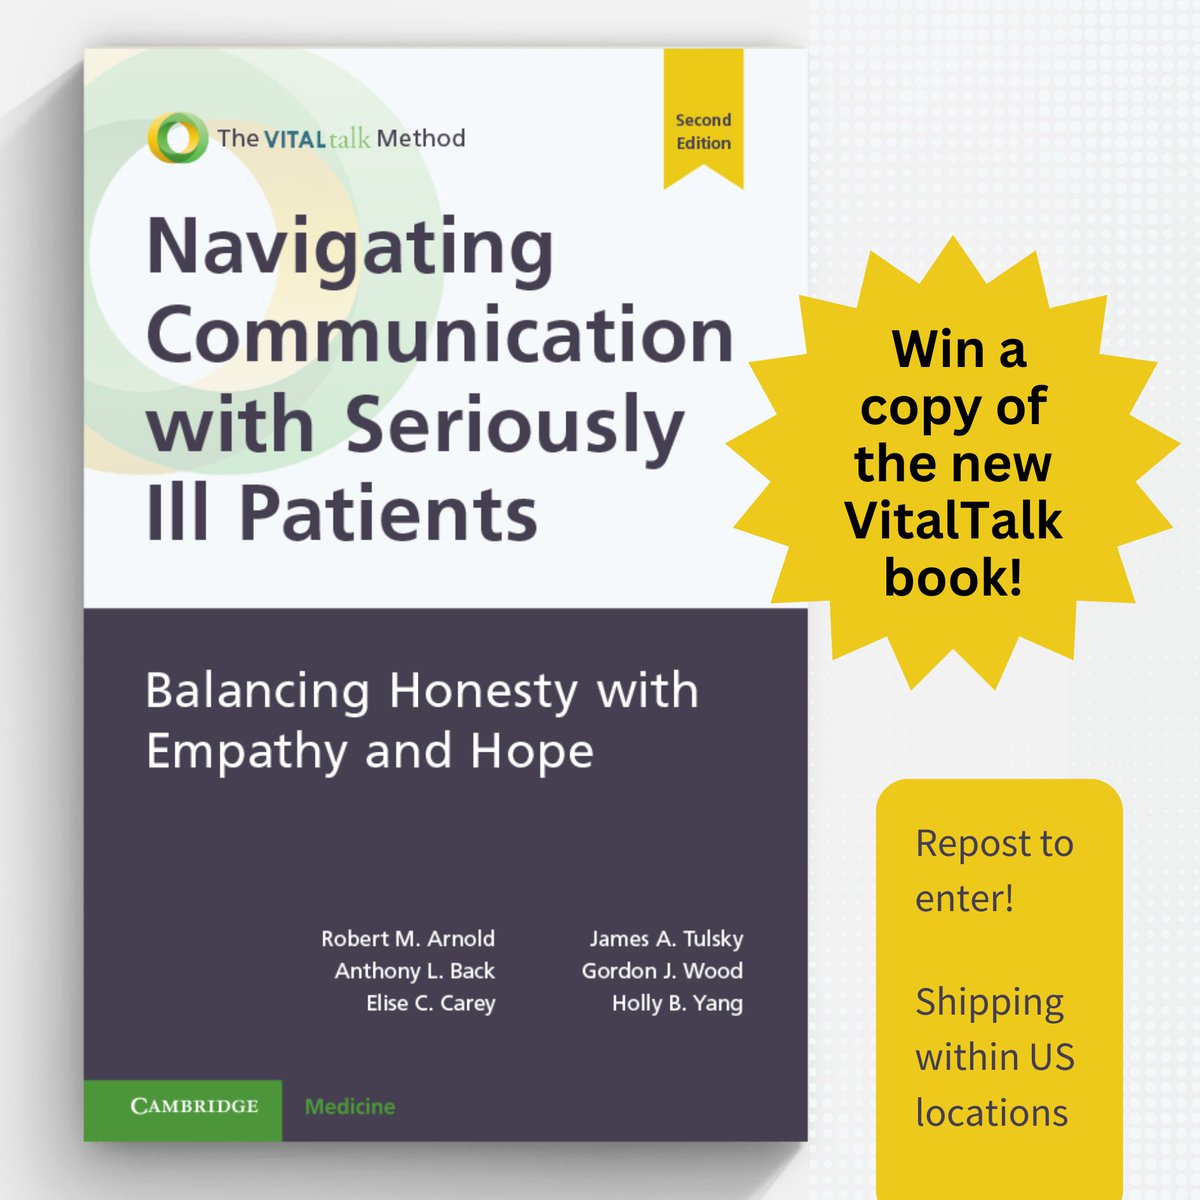 A MUST-READ for all Geriatricians, PalCare specialists and anyone caring for the seriously ill: @VitalTalk has released the 2nd ed of Navigating Communication. Repost to win a copy! Or skip the contest & order now! amzn.to/3wyozxp @rabob @anthony_back @jatulsky @hollyby